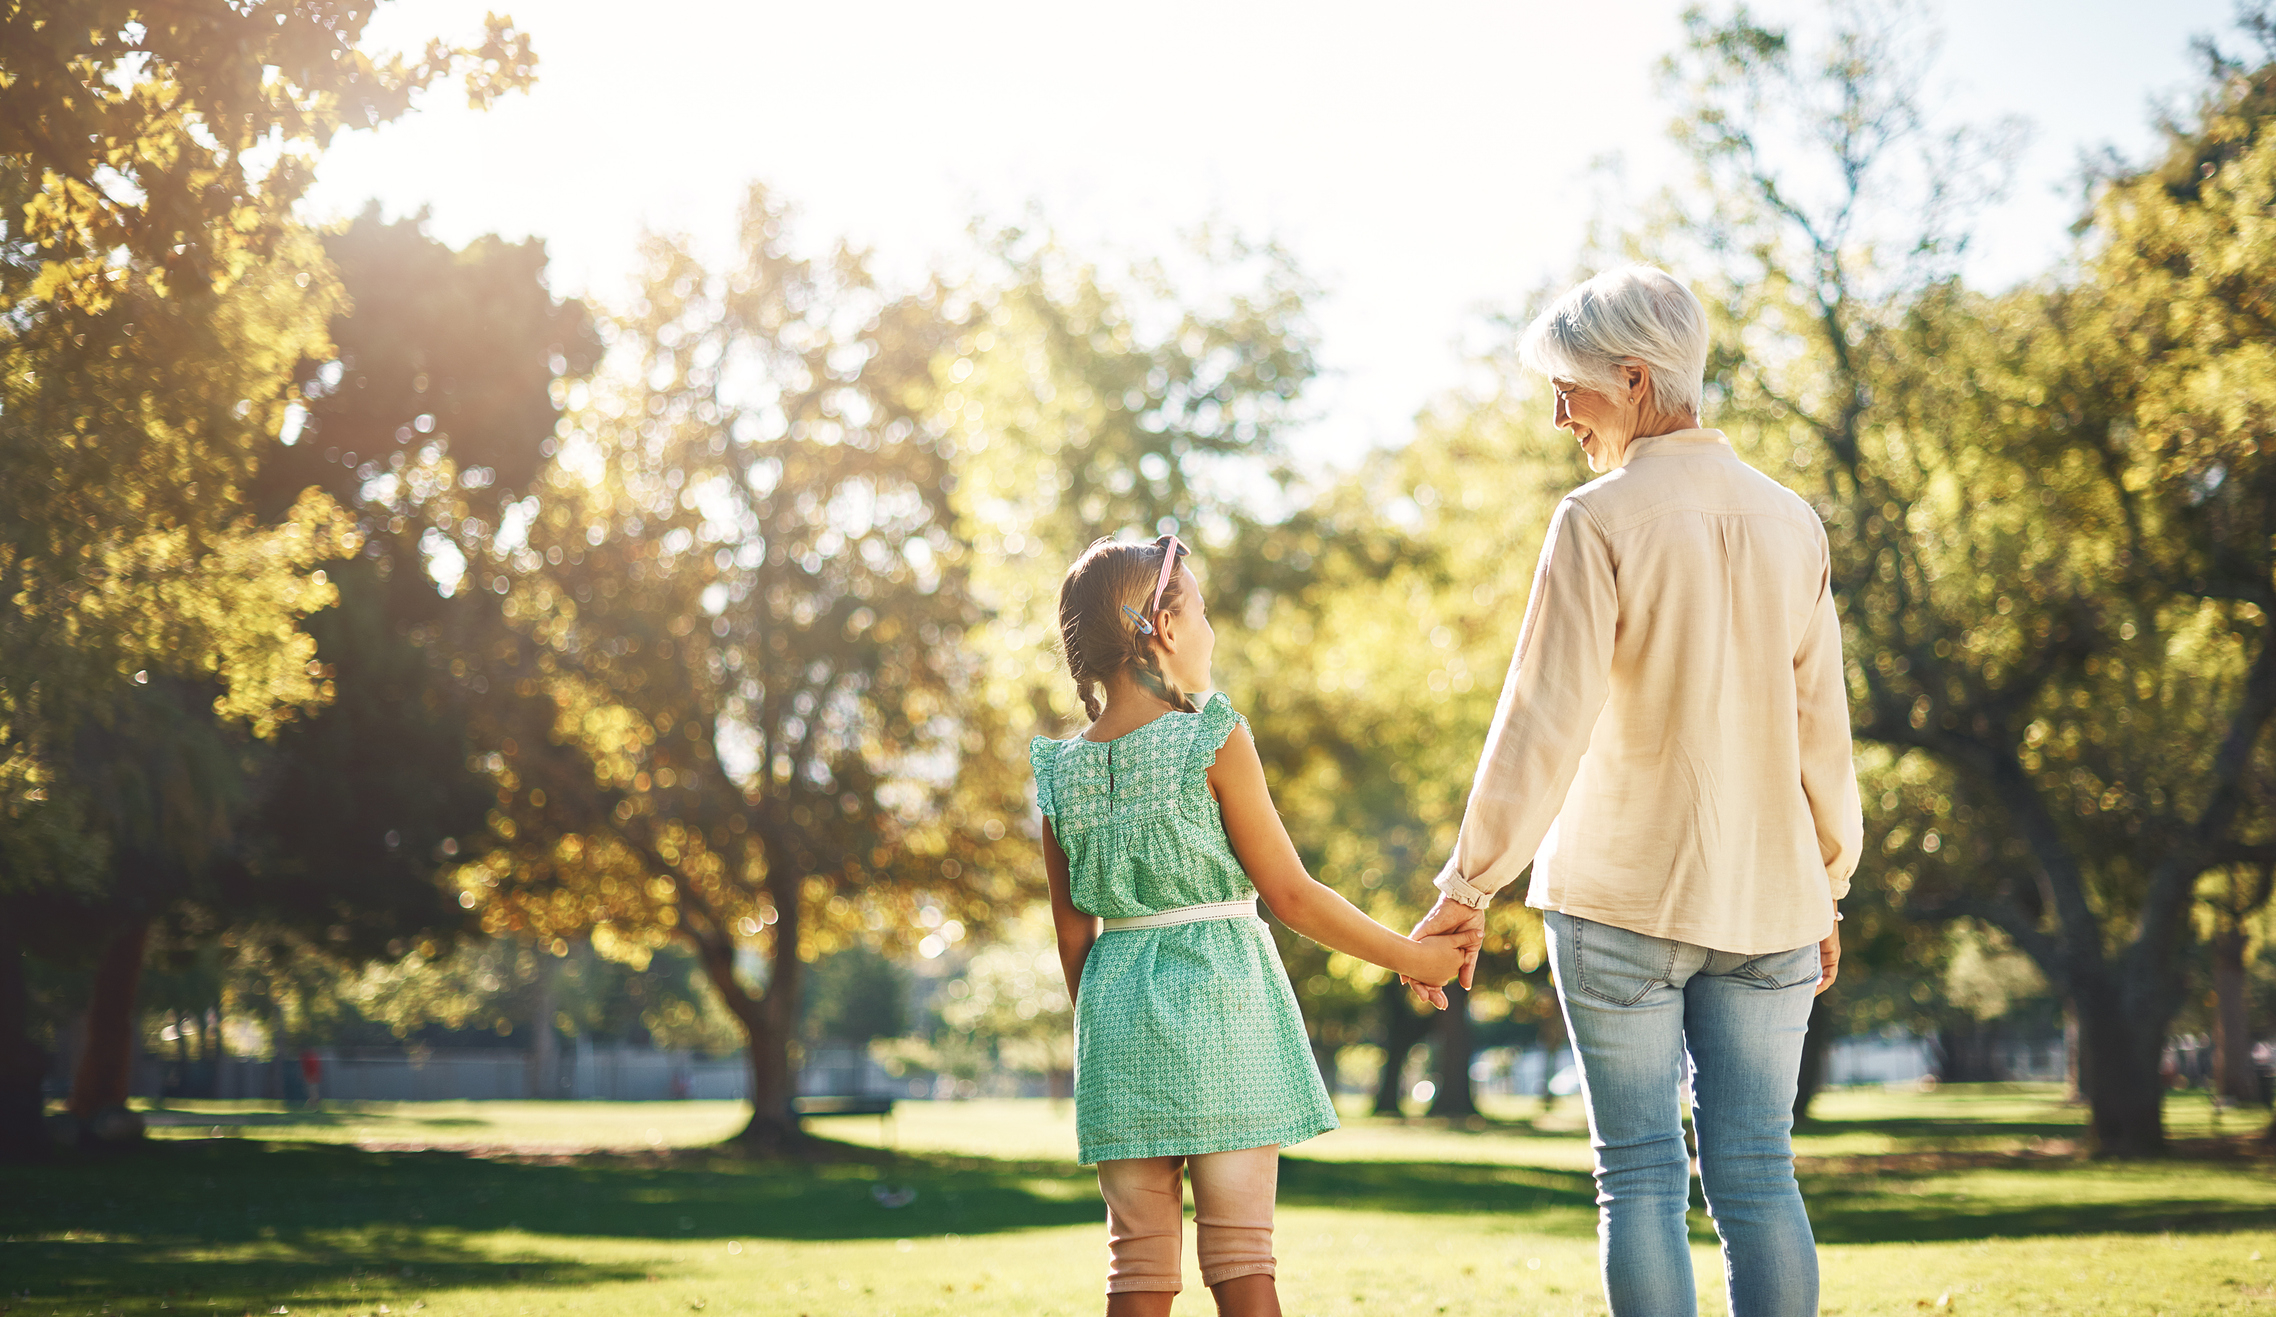 An older woman and a young girl walk hand-in-hand through a sunny park, smiling at each other. The woman wears jeans and a shirt, and the girl wears a dress and boots